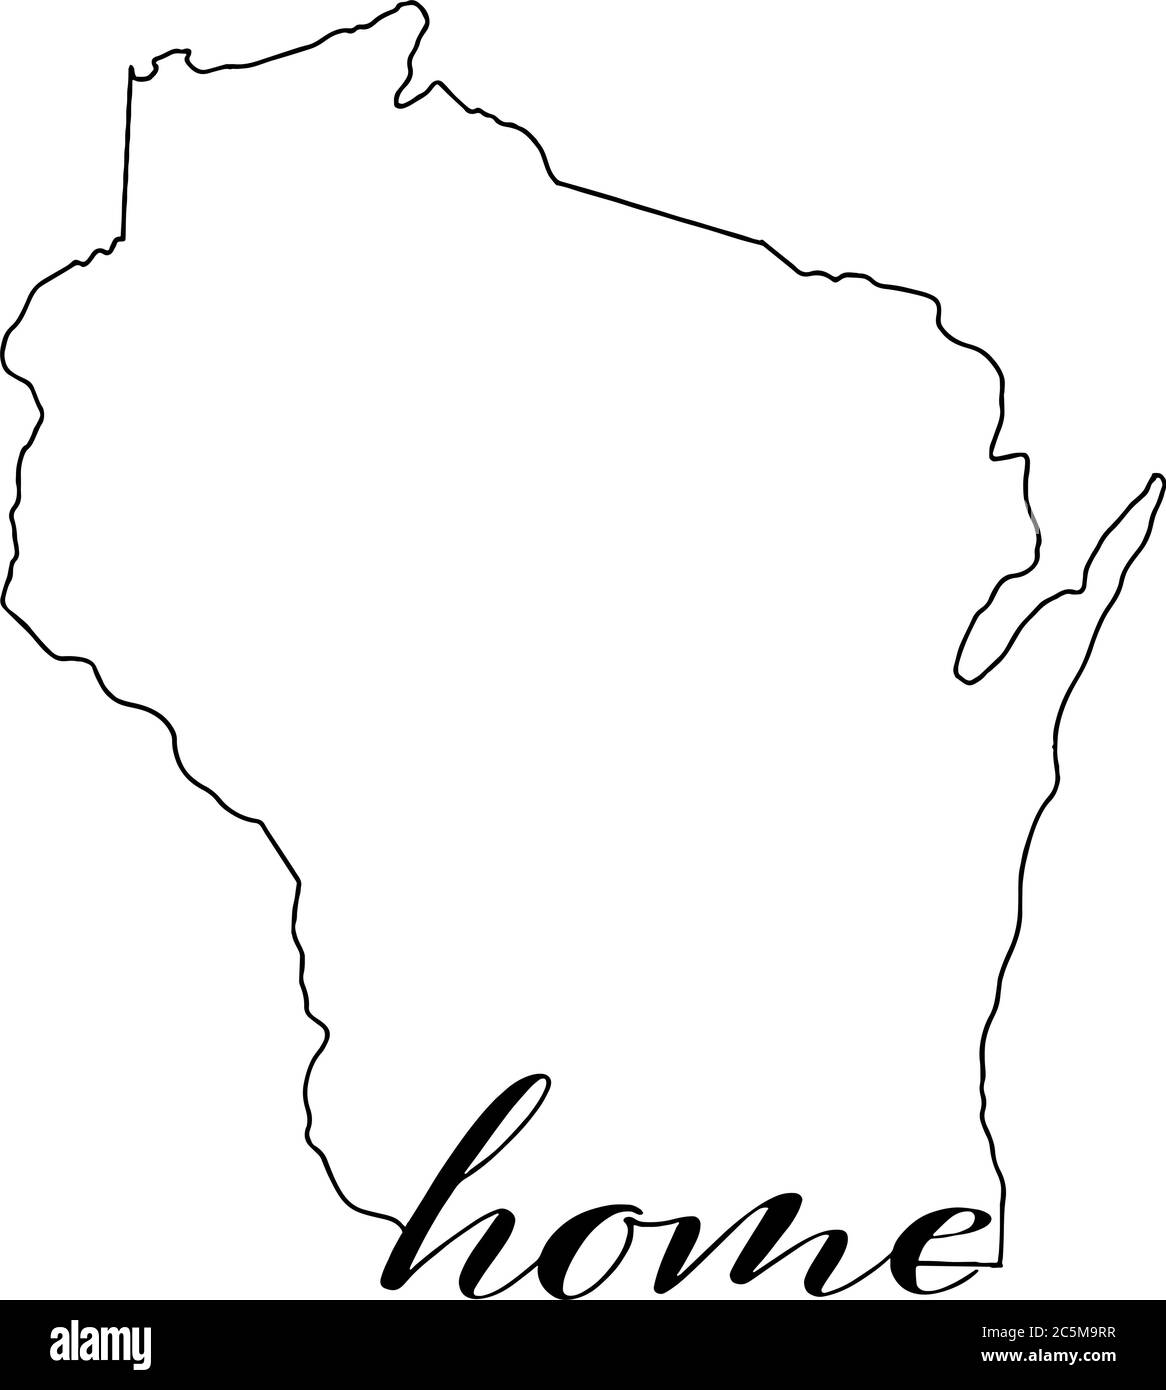 Wisconsin state map outline with the word home written in the outline, isolated on white background Stock Vector